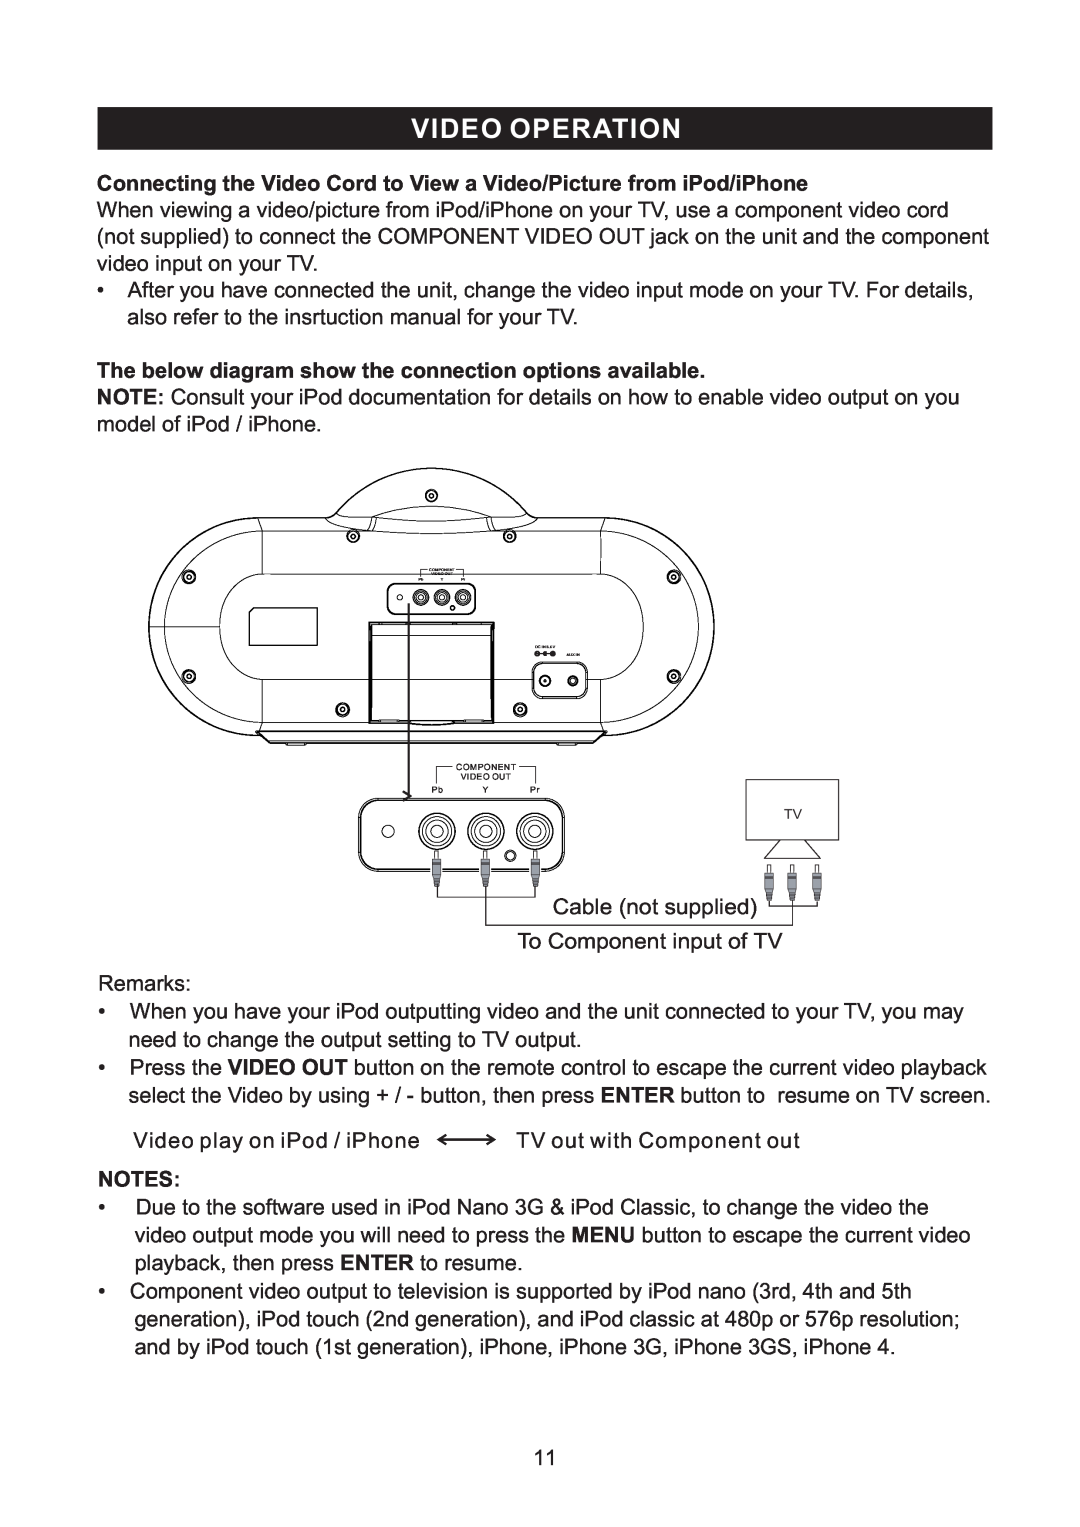 Haier IPDS-10 user manual Video Operation, Cable not supplied To Component input of TV 